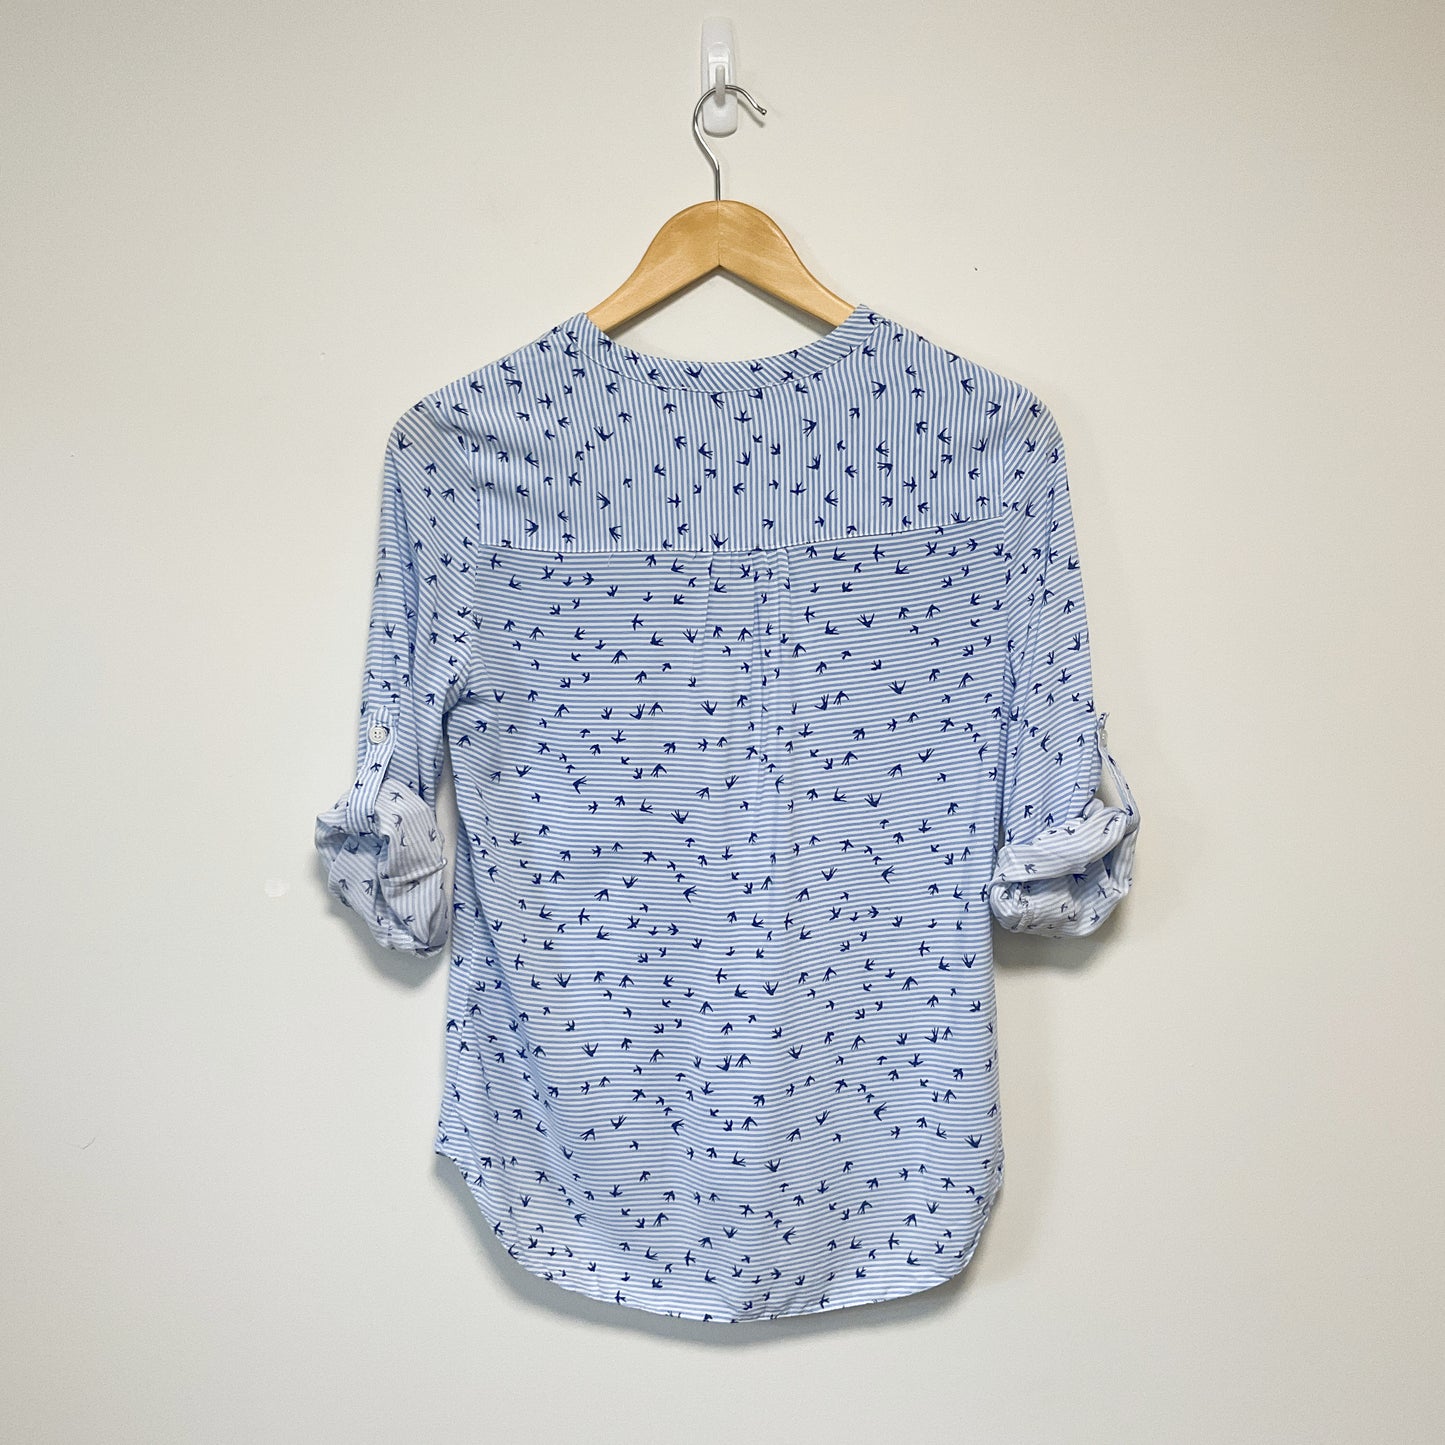 Atmosphere - Women's Shirt Blouse Blue With Swallow Bird Pattern